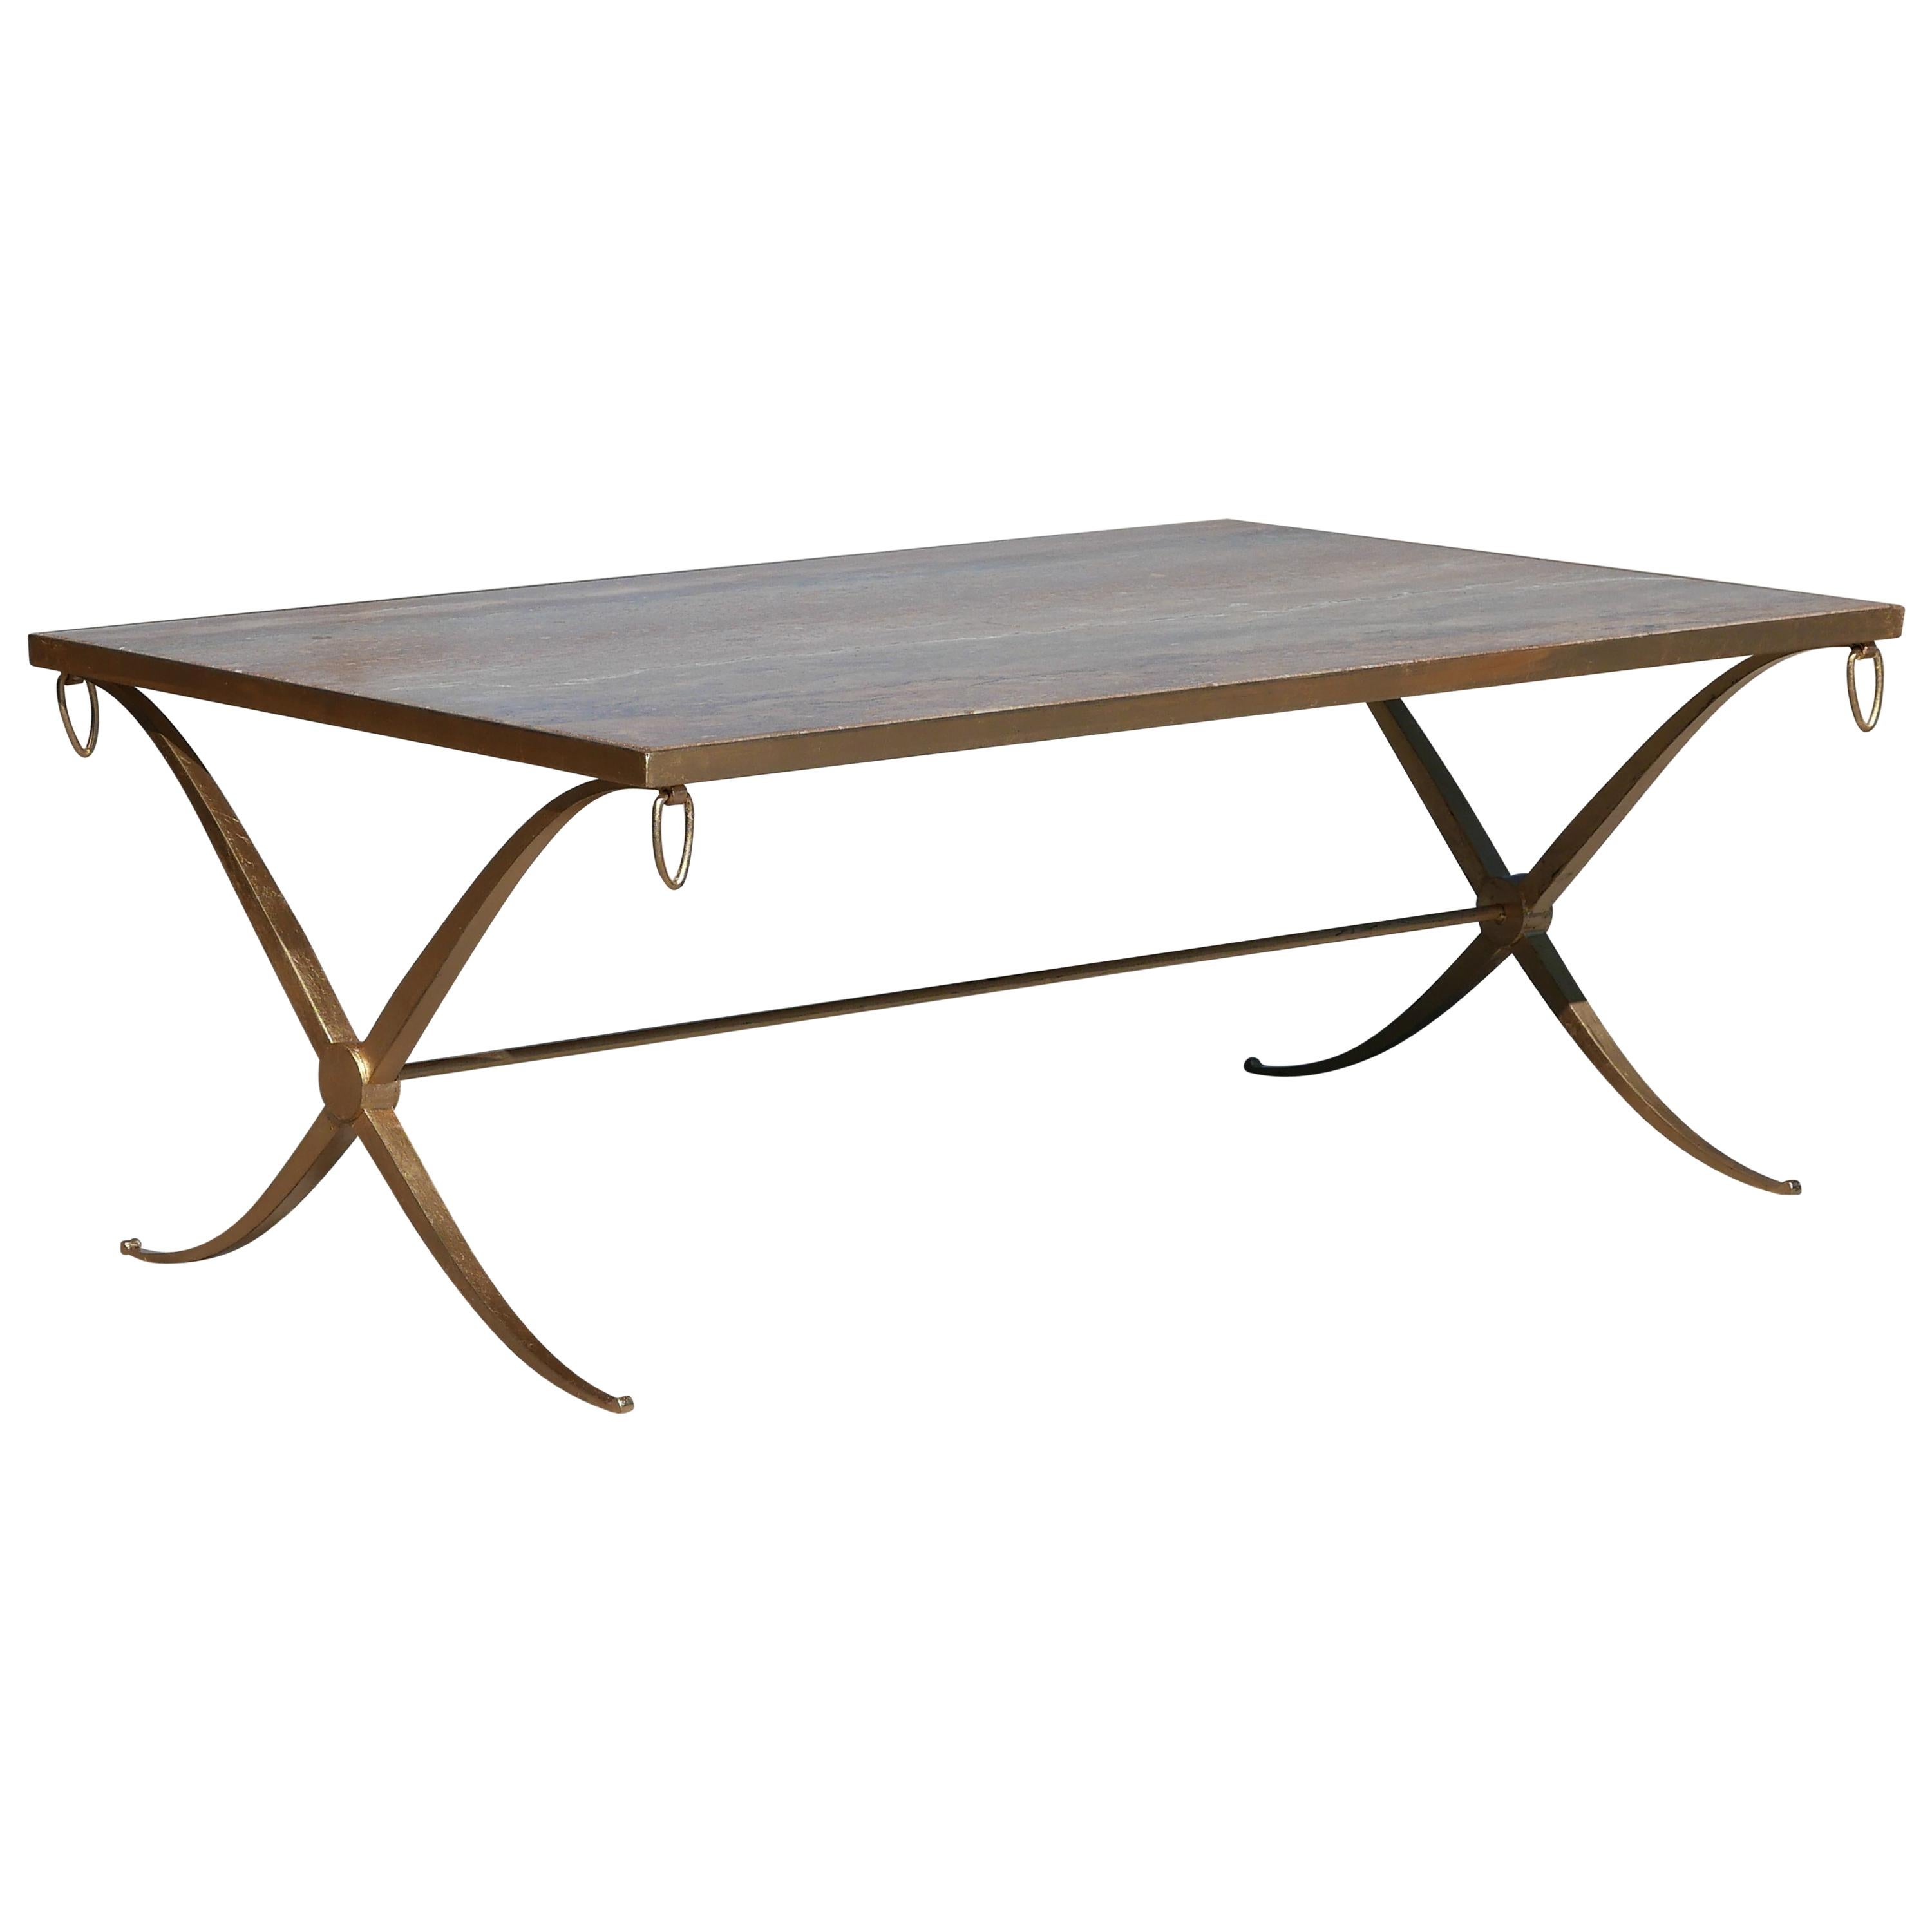 Gilt Iron Coffee Table by Barbara Barry